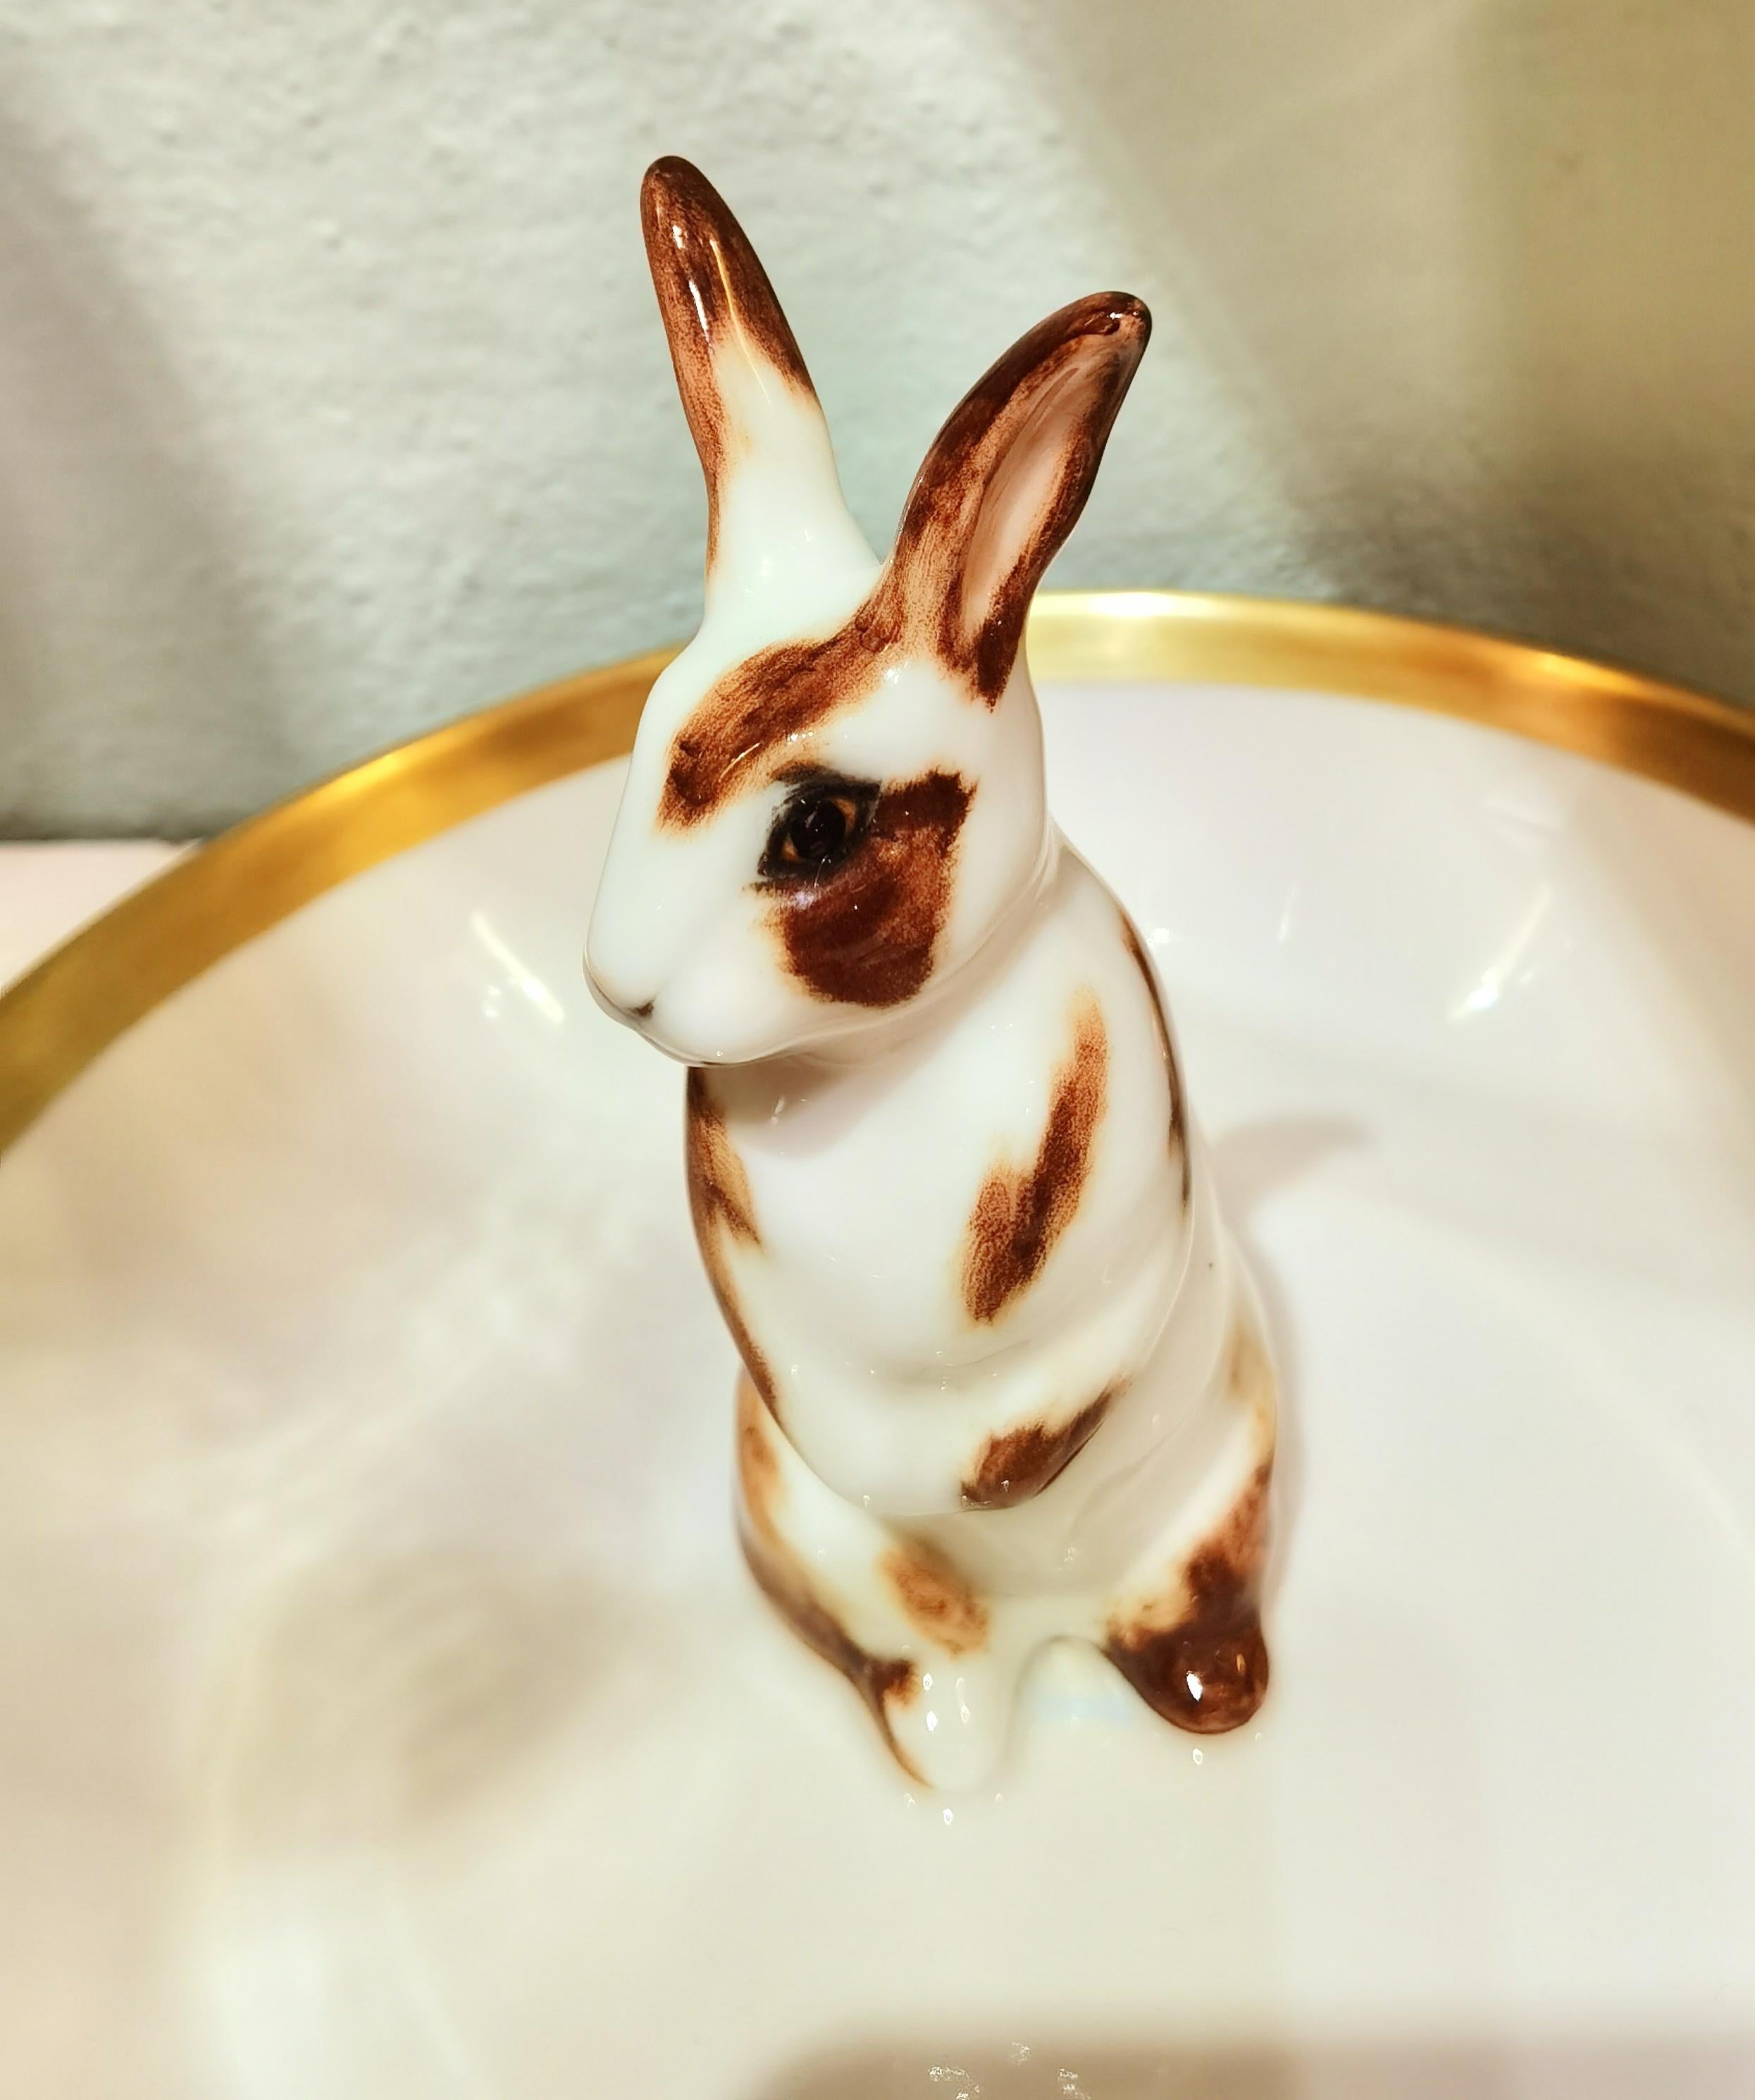 Completely handmade porcelain bowl with a hands-free naturalistic painted Easter bunny figure with brown spots in country style. The bunny is sitting in the middle of the bowl for decorating nuts or sweets around. Rimmed with a 24-carat gold line.